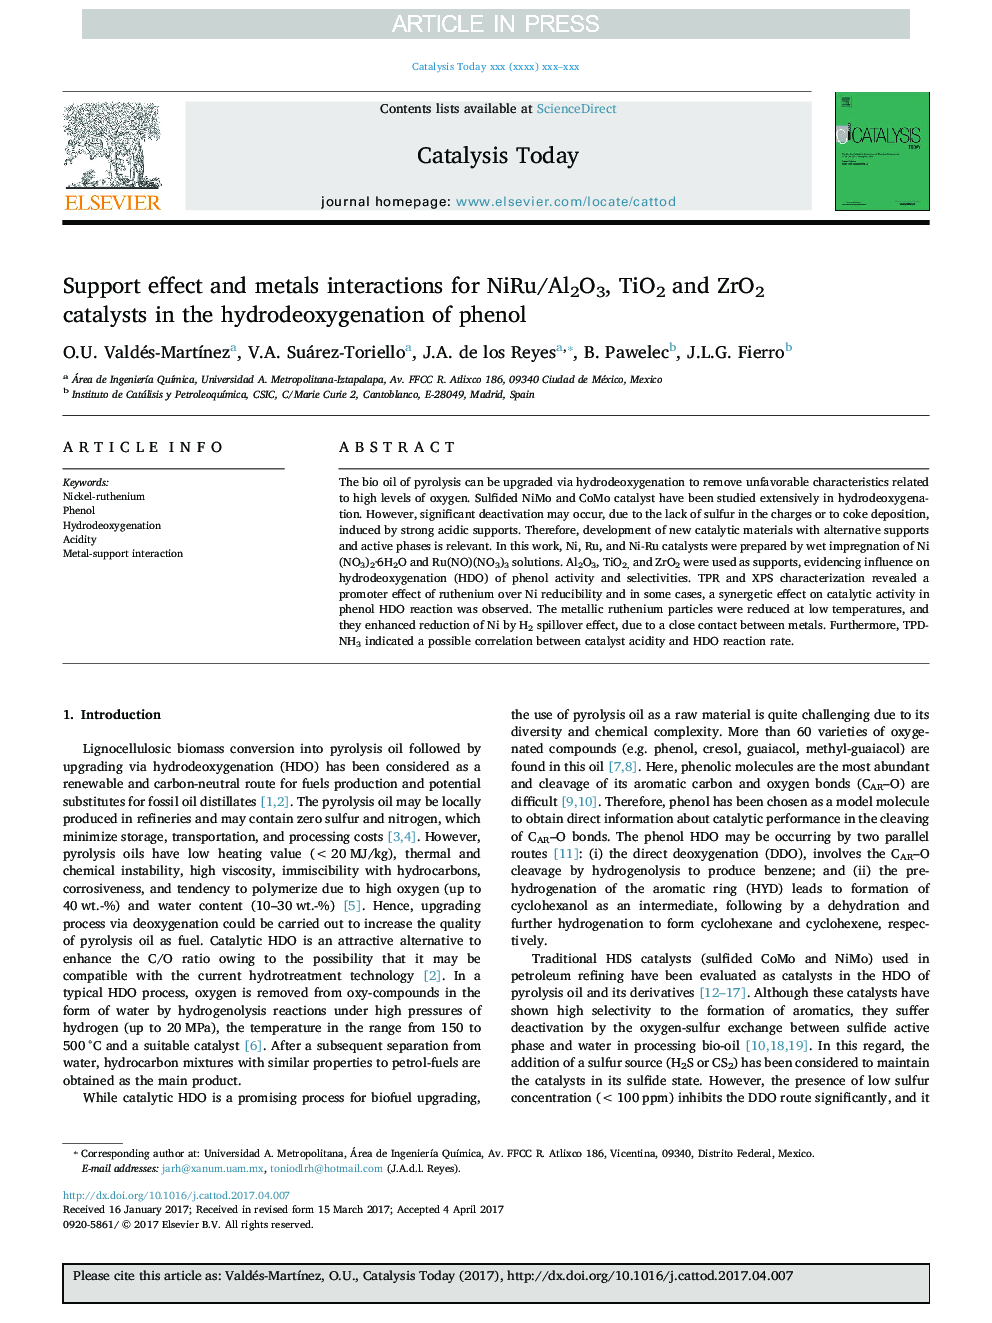 Support effect and metals interactions for NiRu/Al2O3, TiO2 and ZrO2 catalysts in the hydrodeoxygenation of phenol